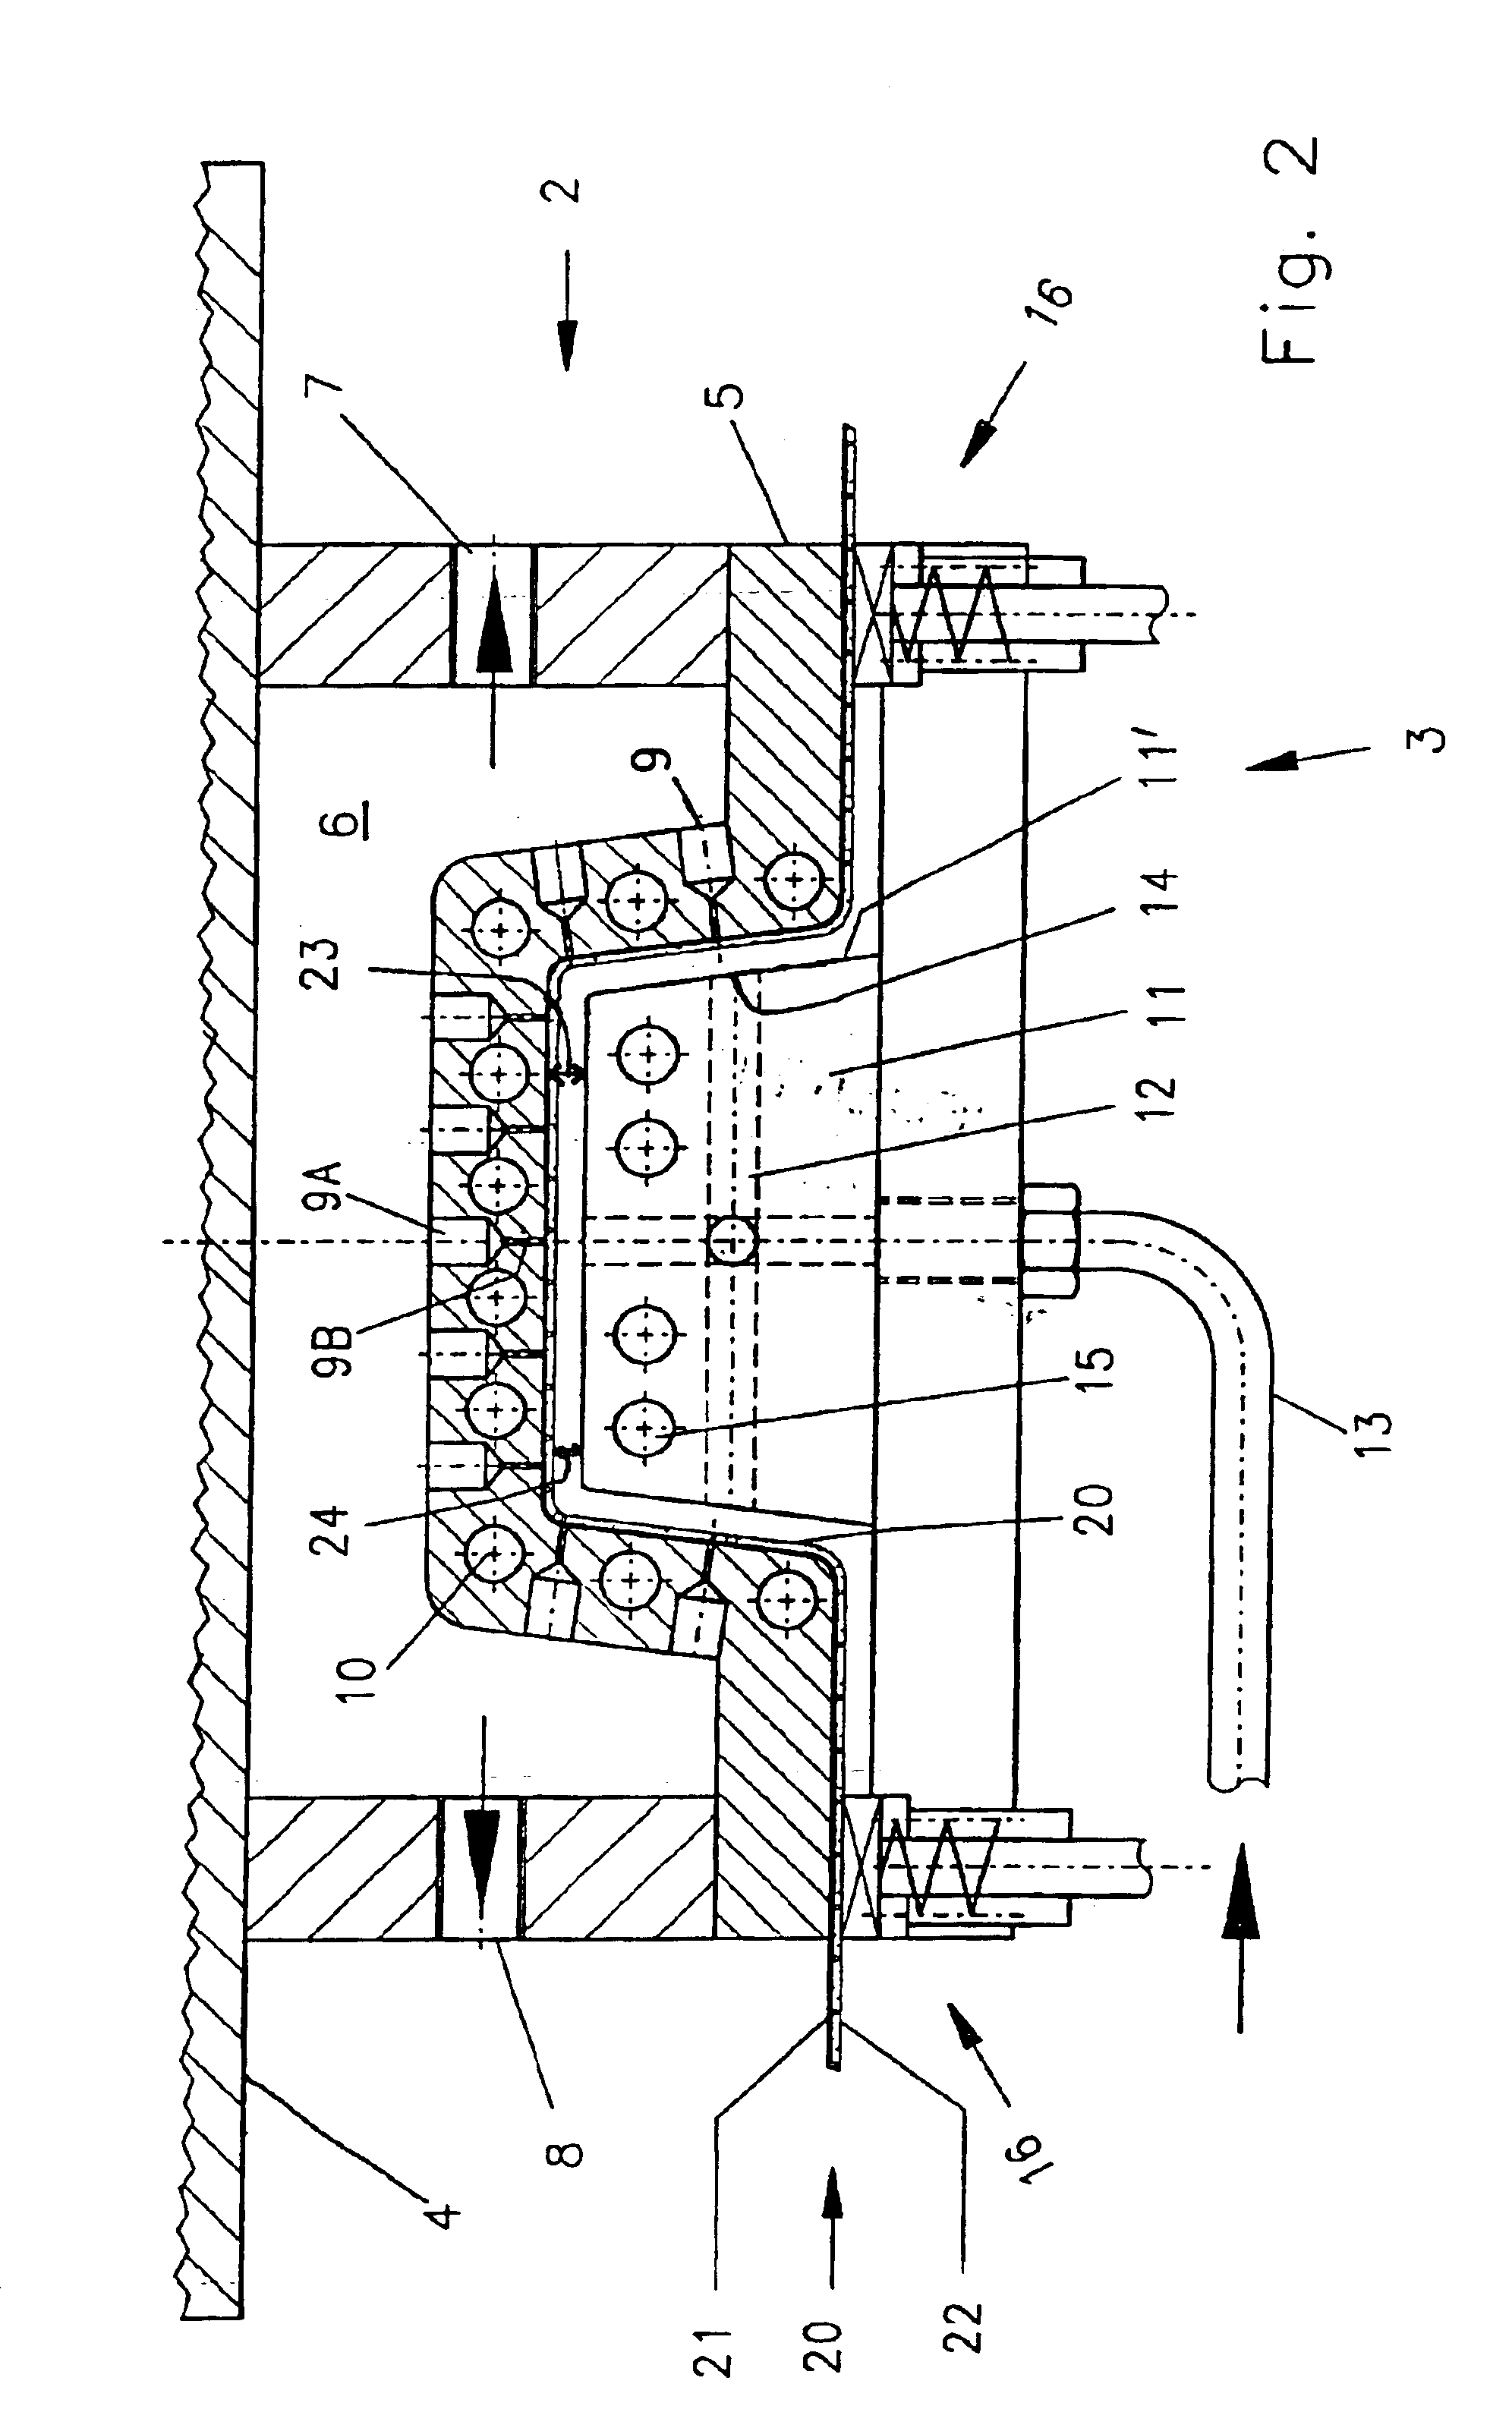 Method and apparatus for molding components with molded-in surface texture